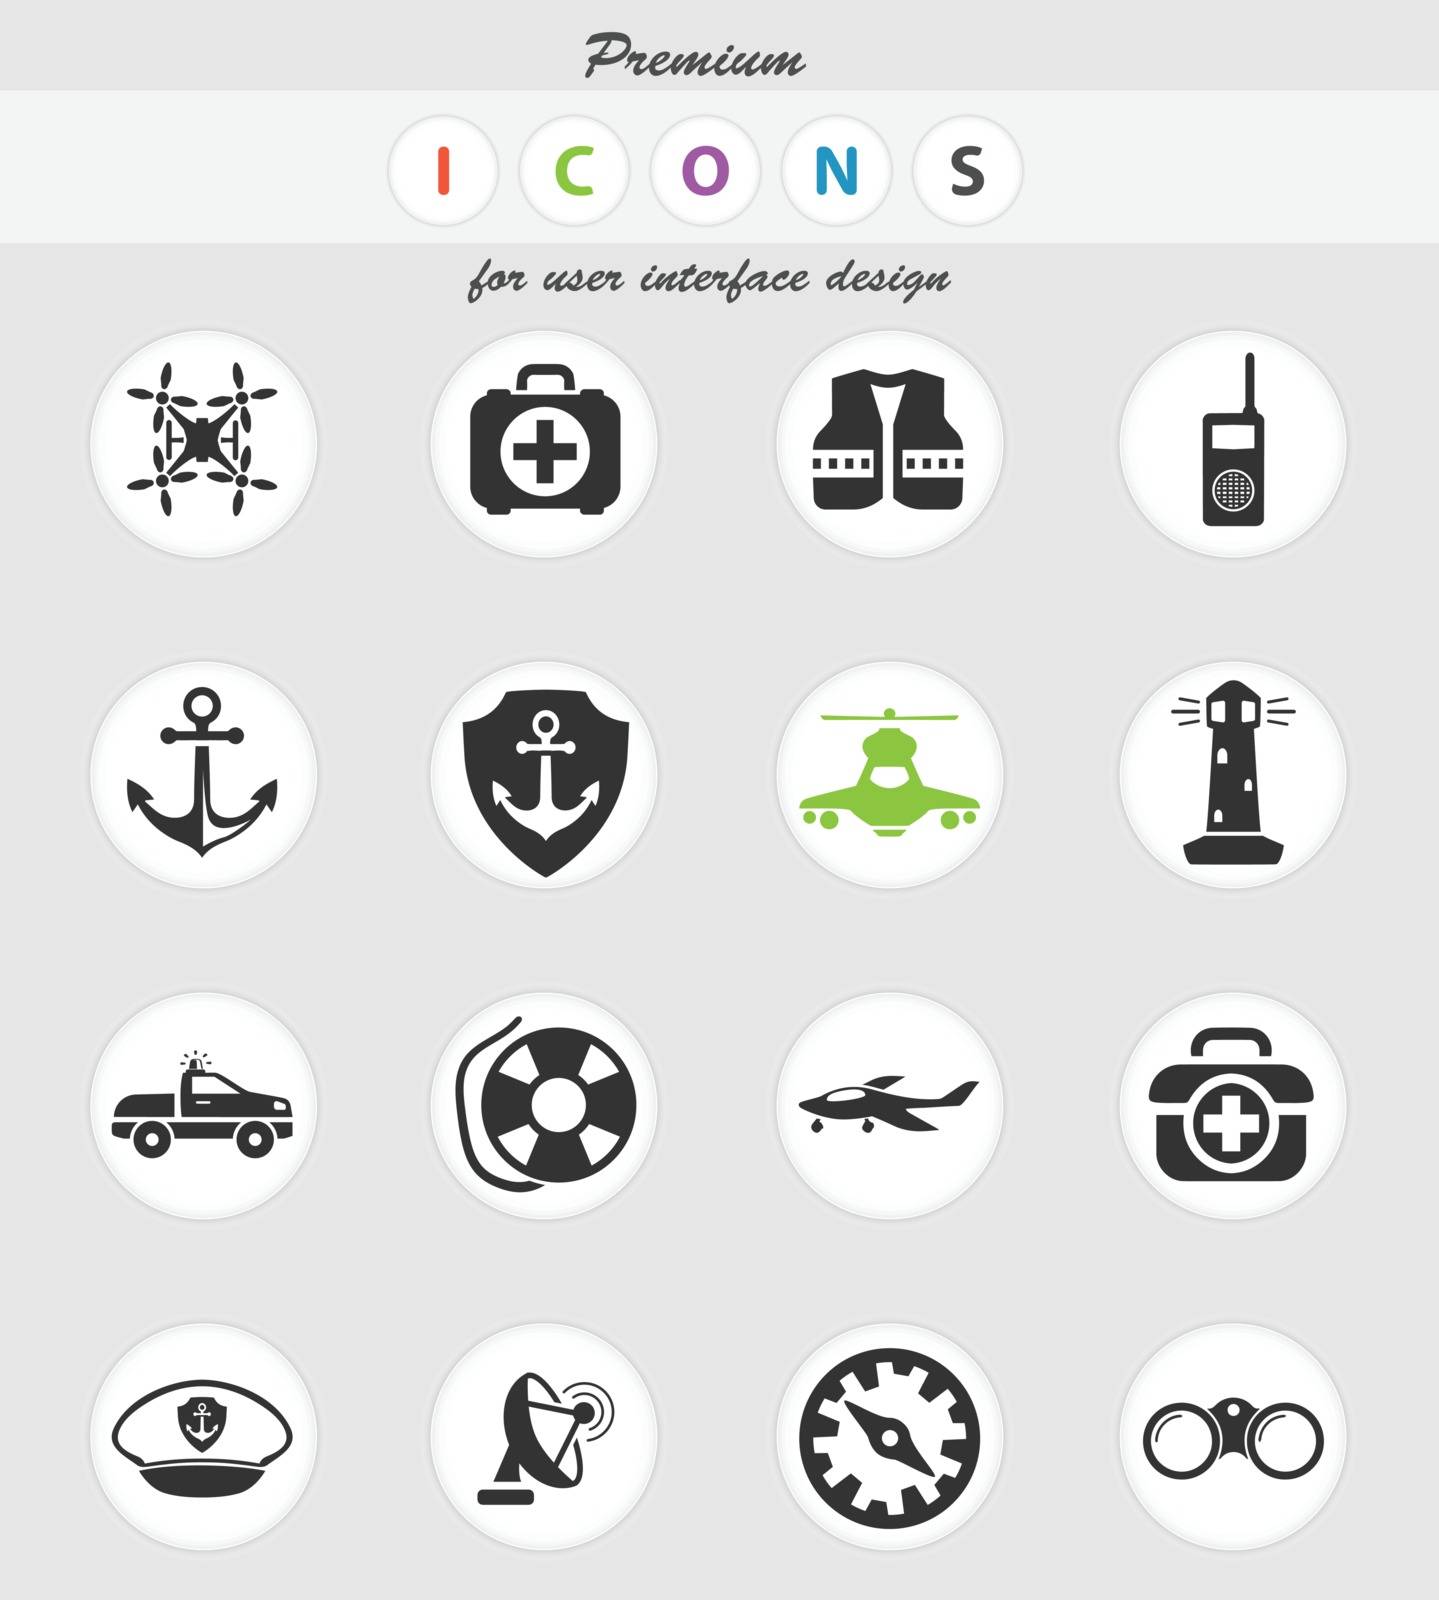 coast guard vector icons for user interface design